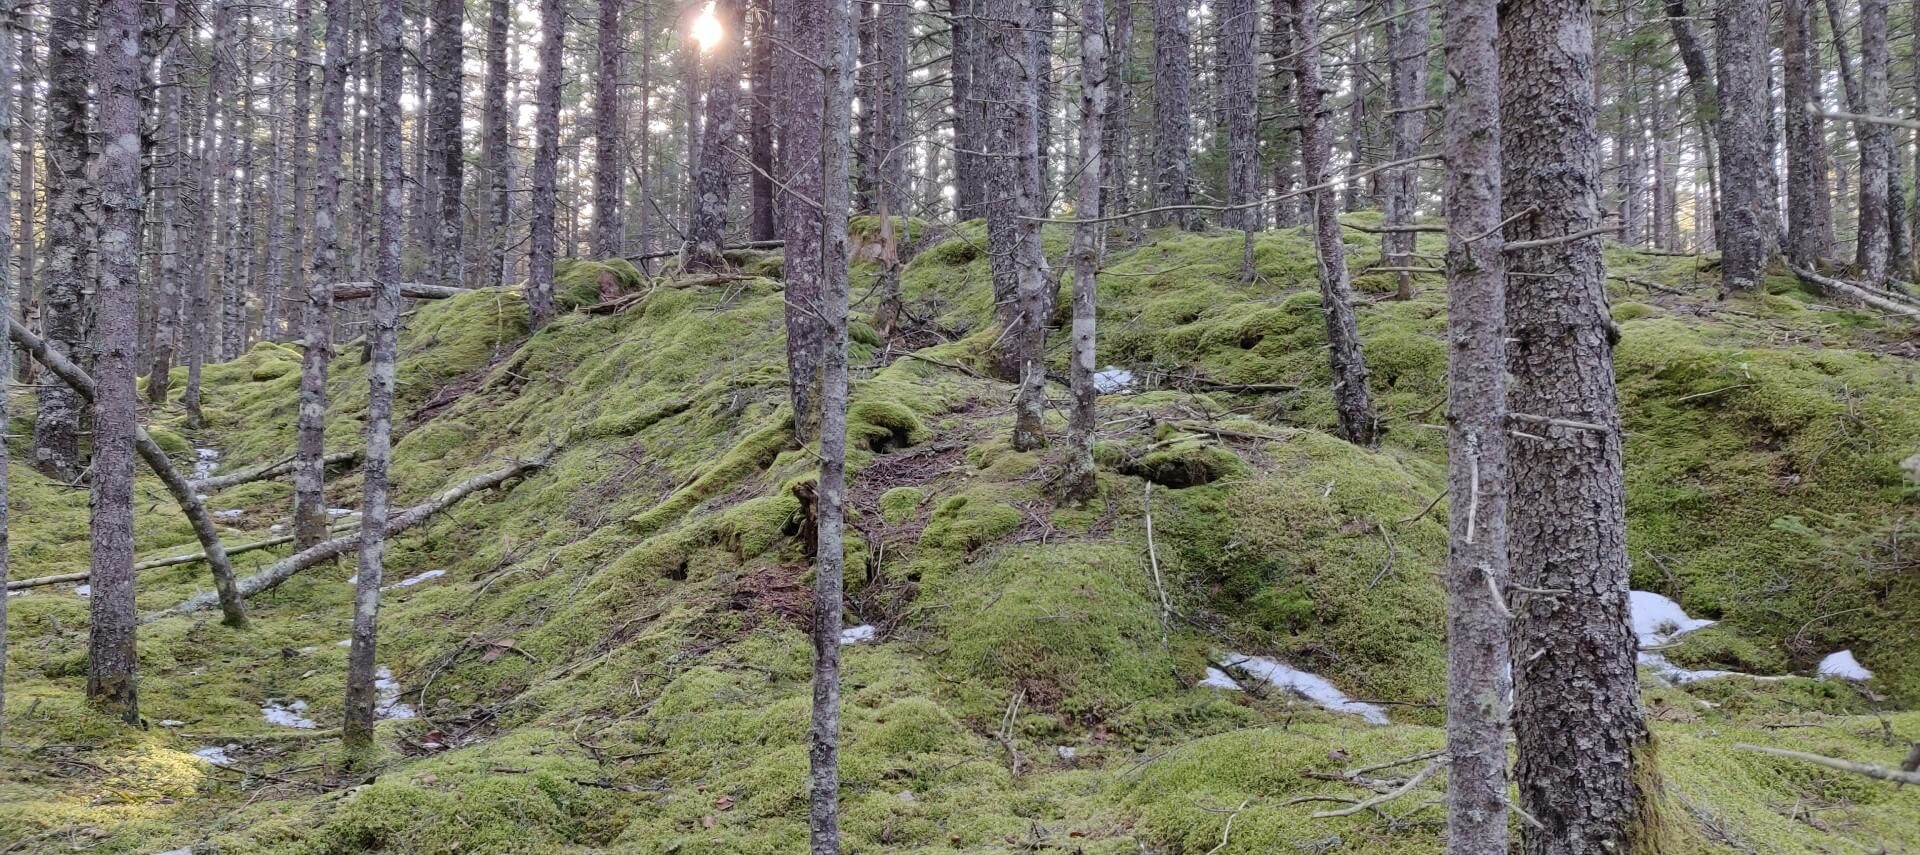 Evergreen trees in a forest, with a hilly, lush green moss forest floor, and a hint of sunshine